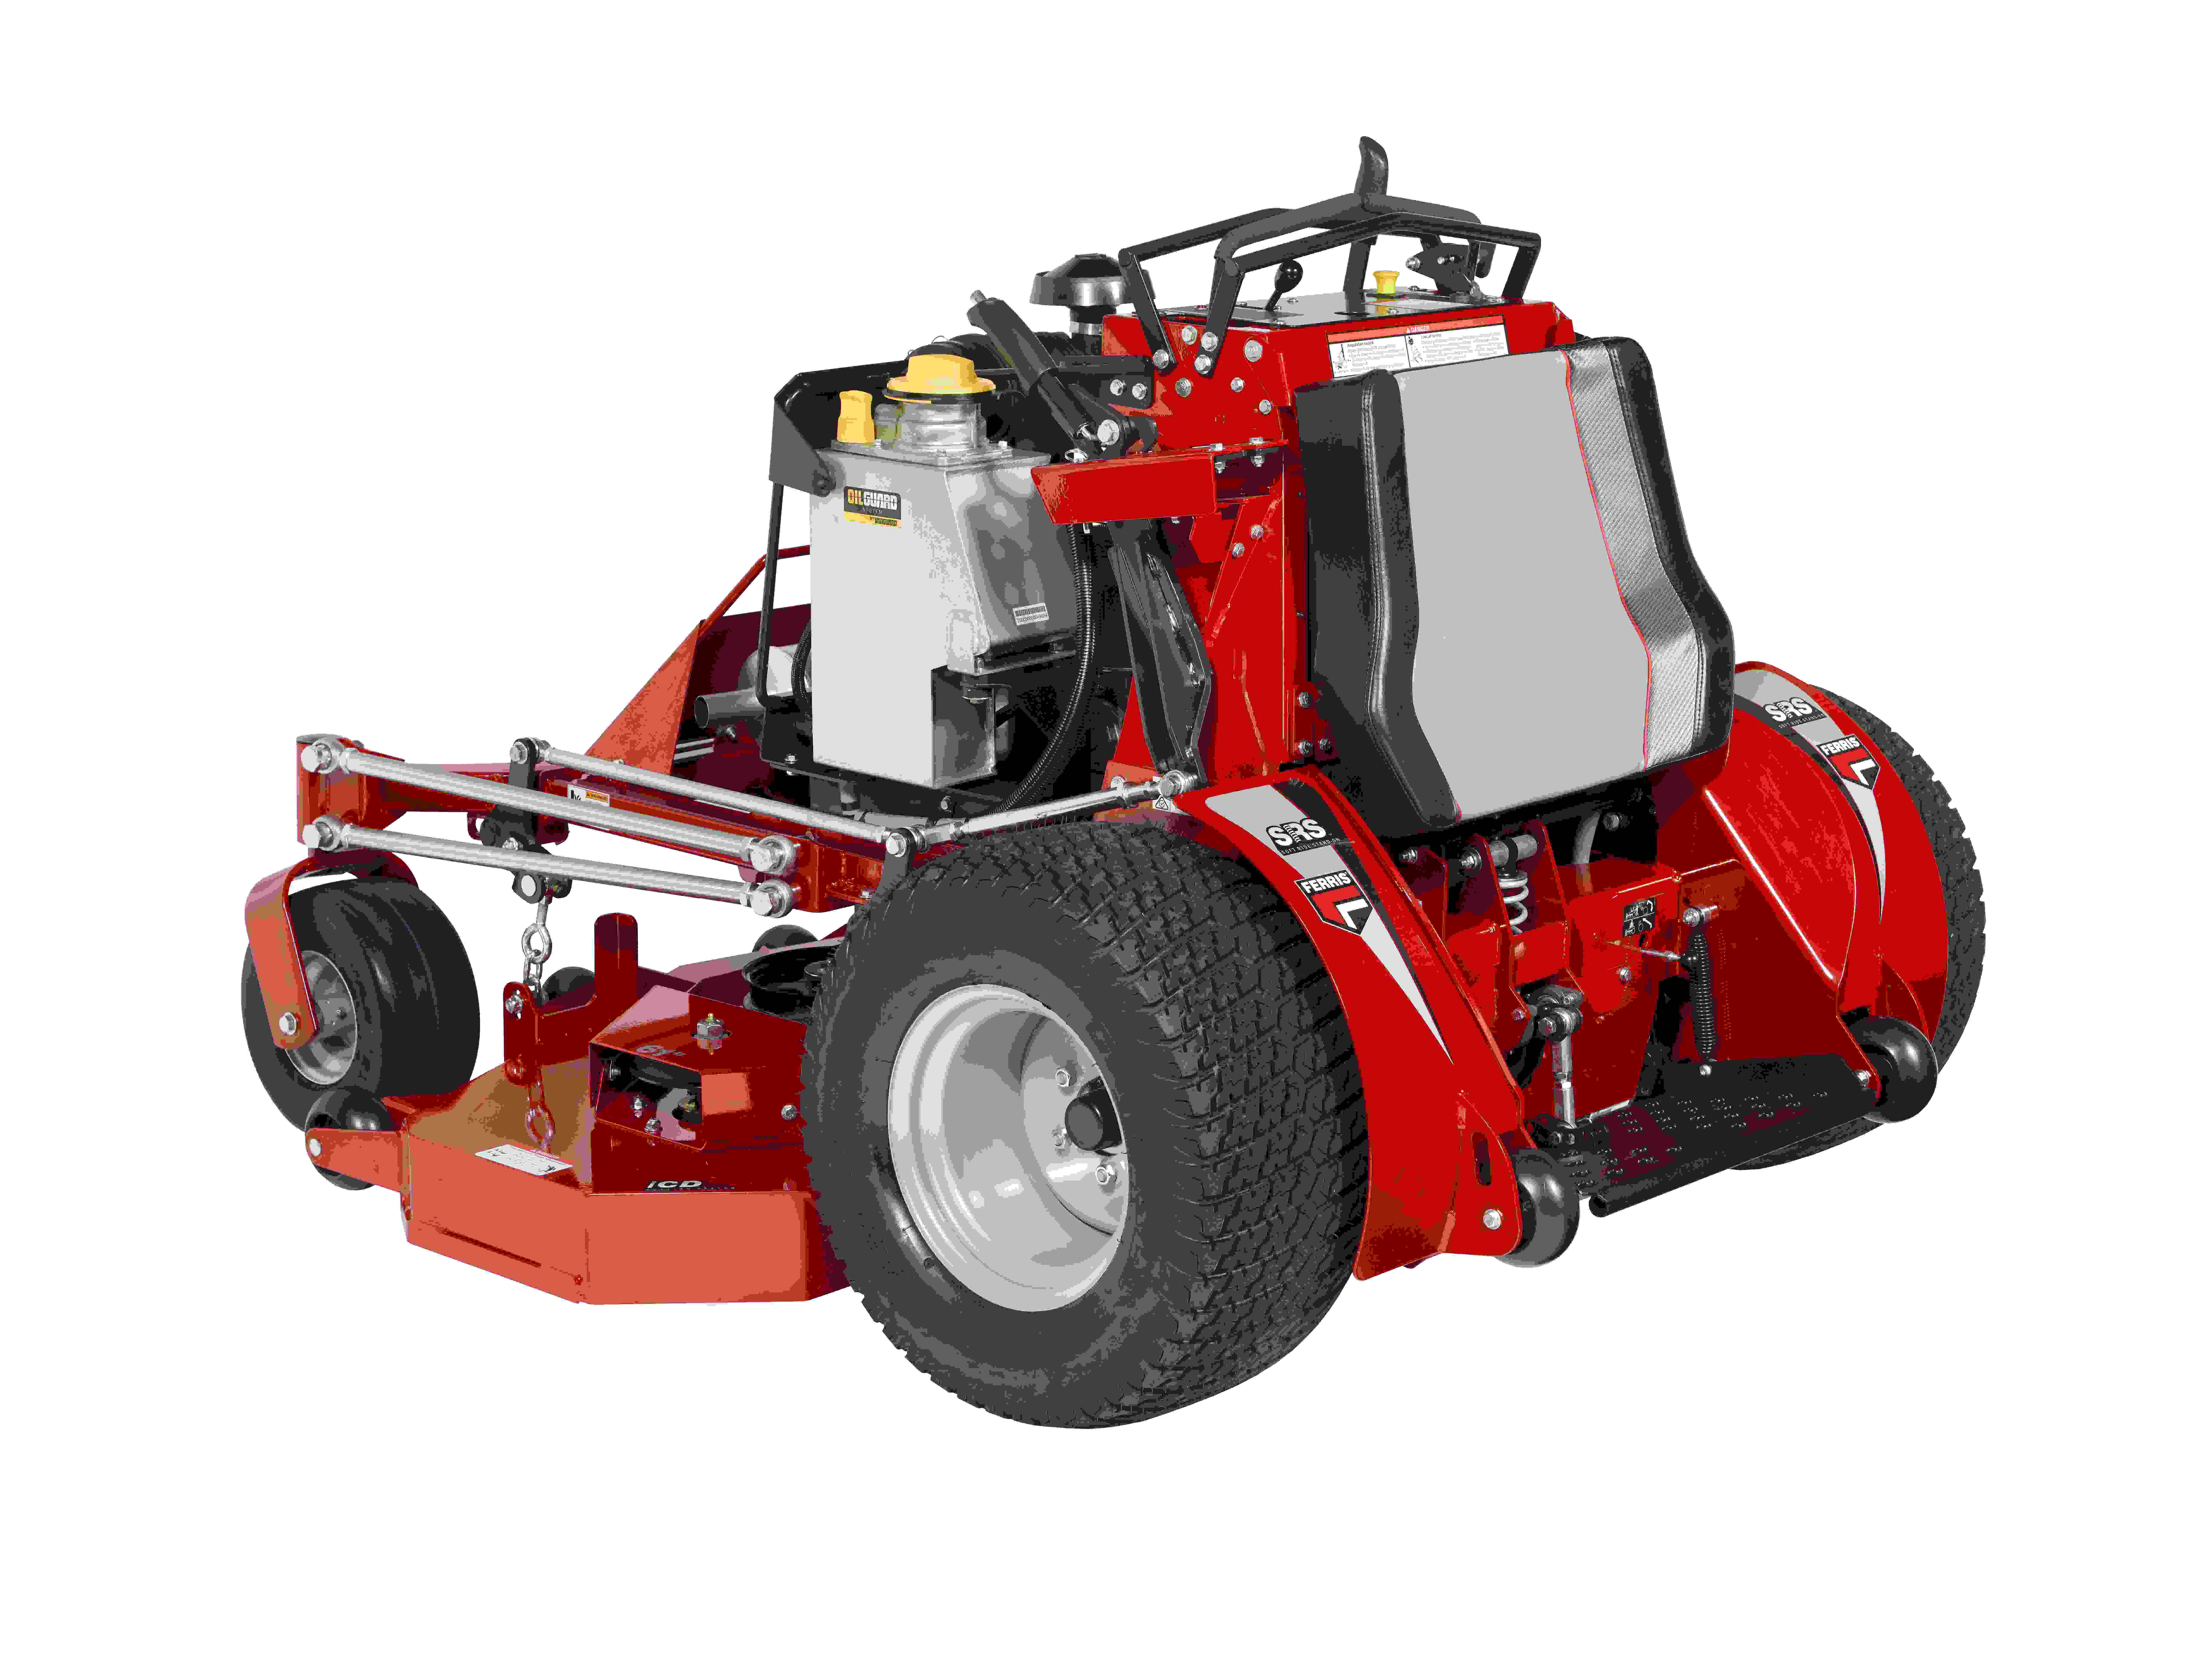 Brand new Ferris stand-on mower to debut at GIE+EXPO | Total 